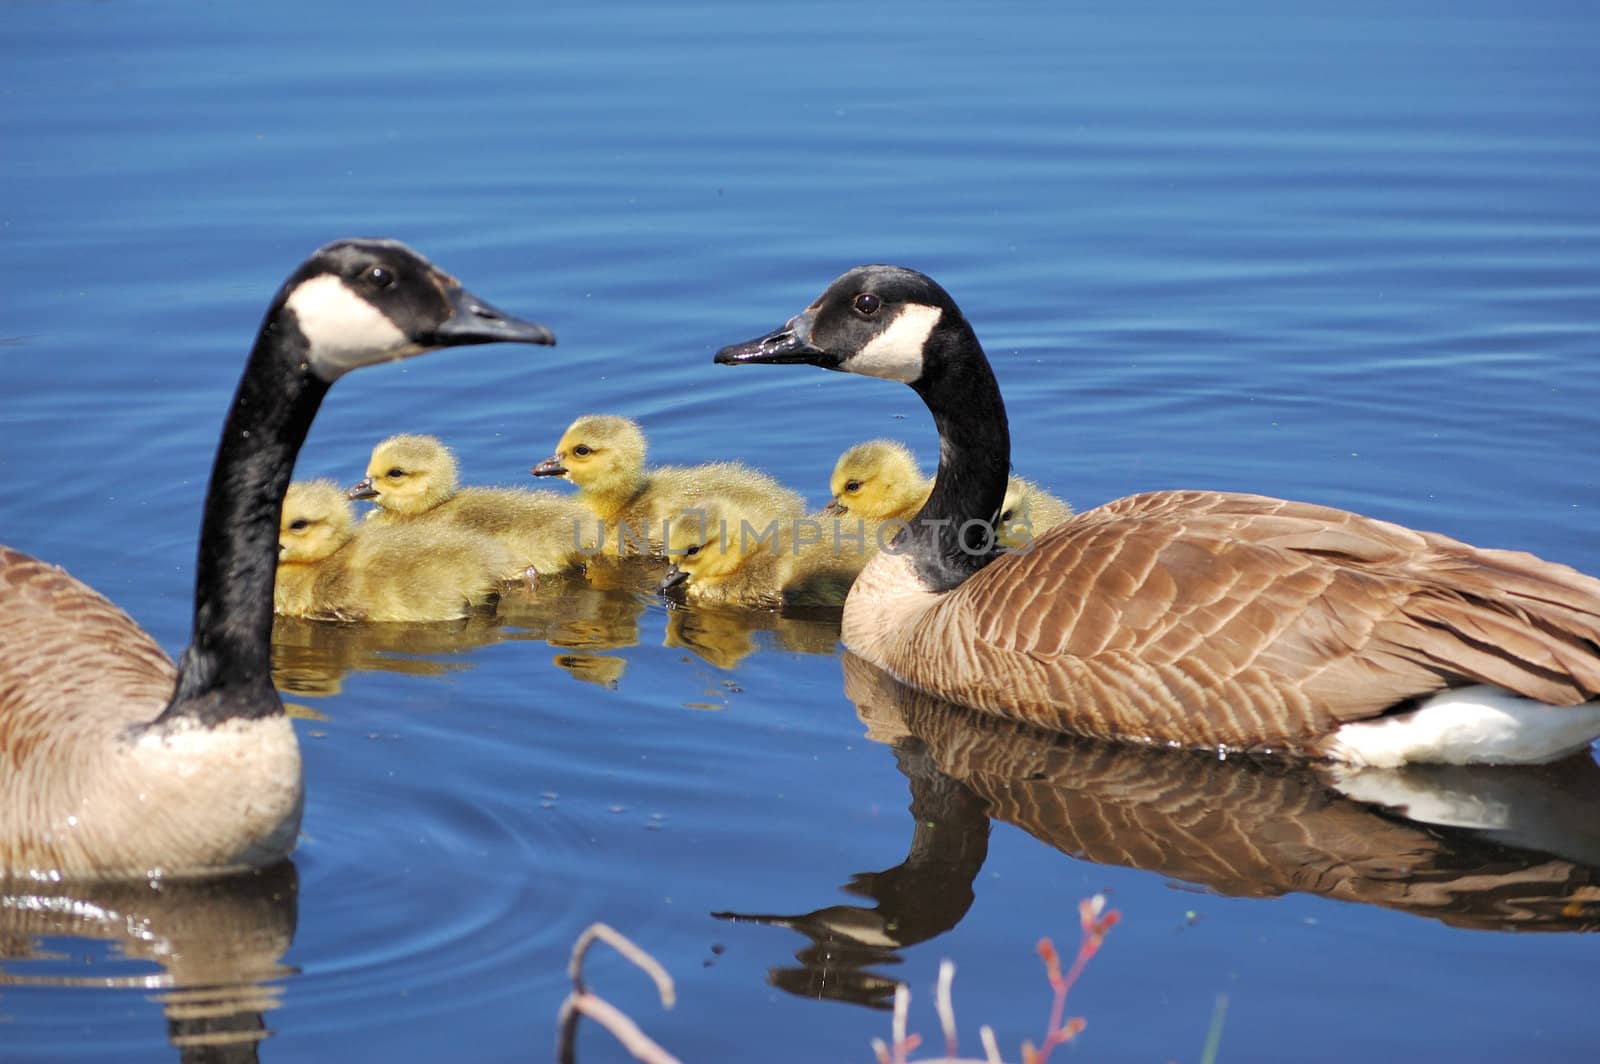 Canada goose goslings swimming in a pond.